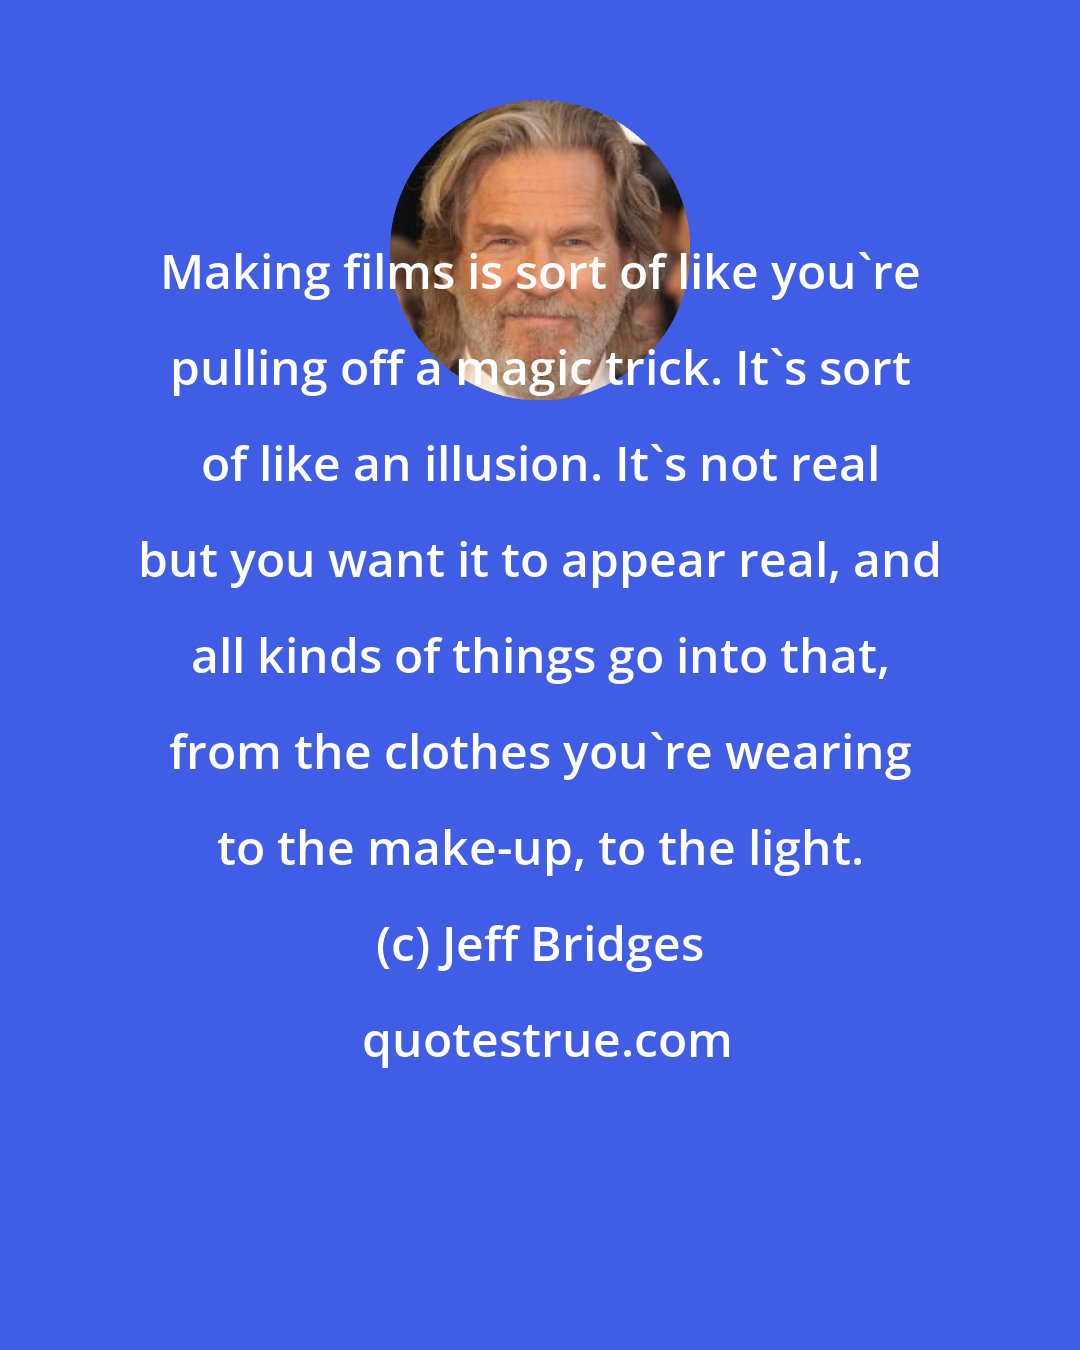 Jeff Bridges: Making films is sort of like you're pulling off a magic trick. It's sort of like an illusion. It's not real but you want it to appear real, and all kinds of things go into that, from the clothes you're wearing to the make-up, to the light.